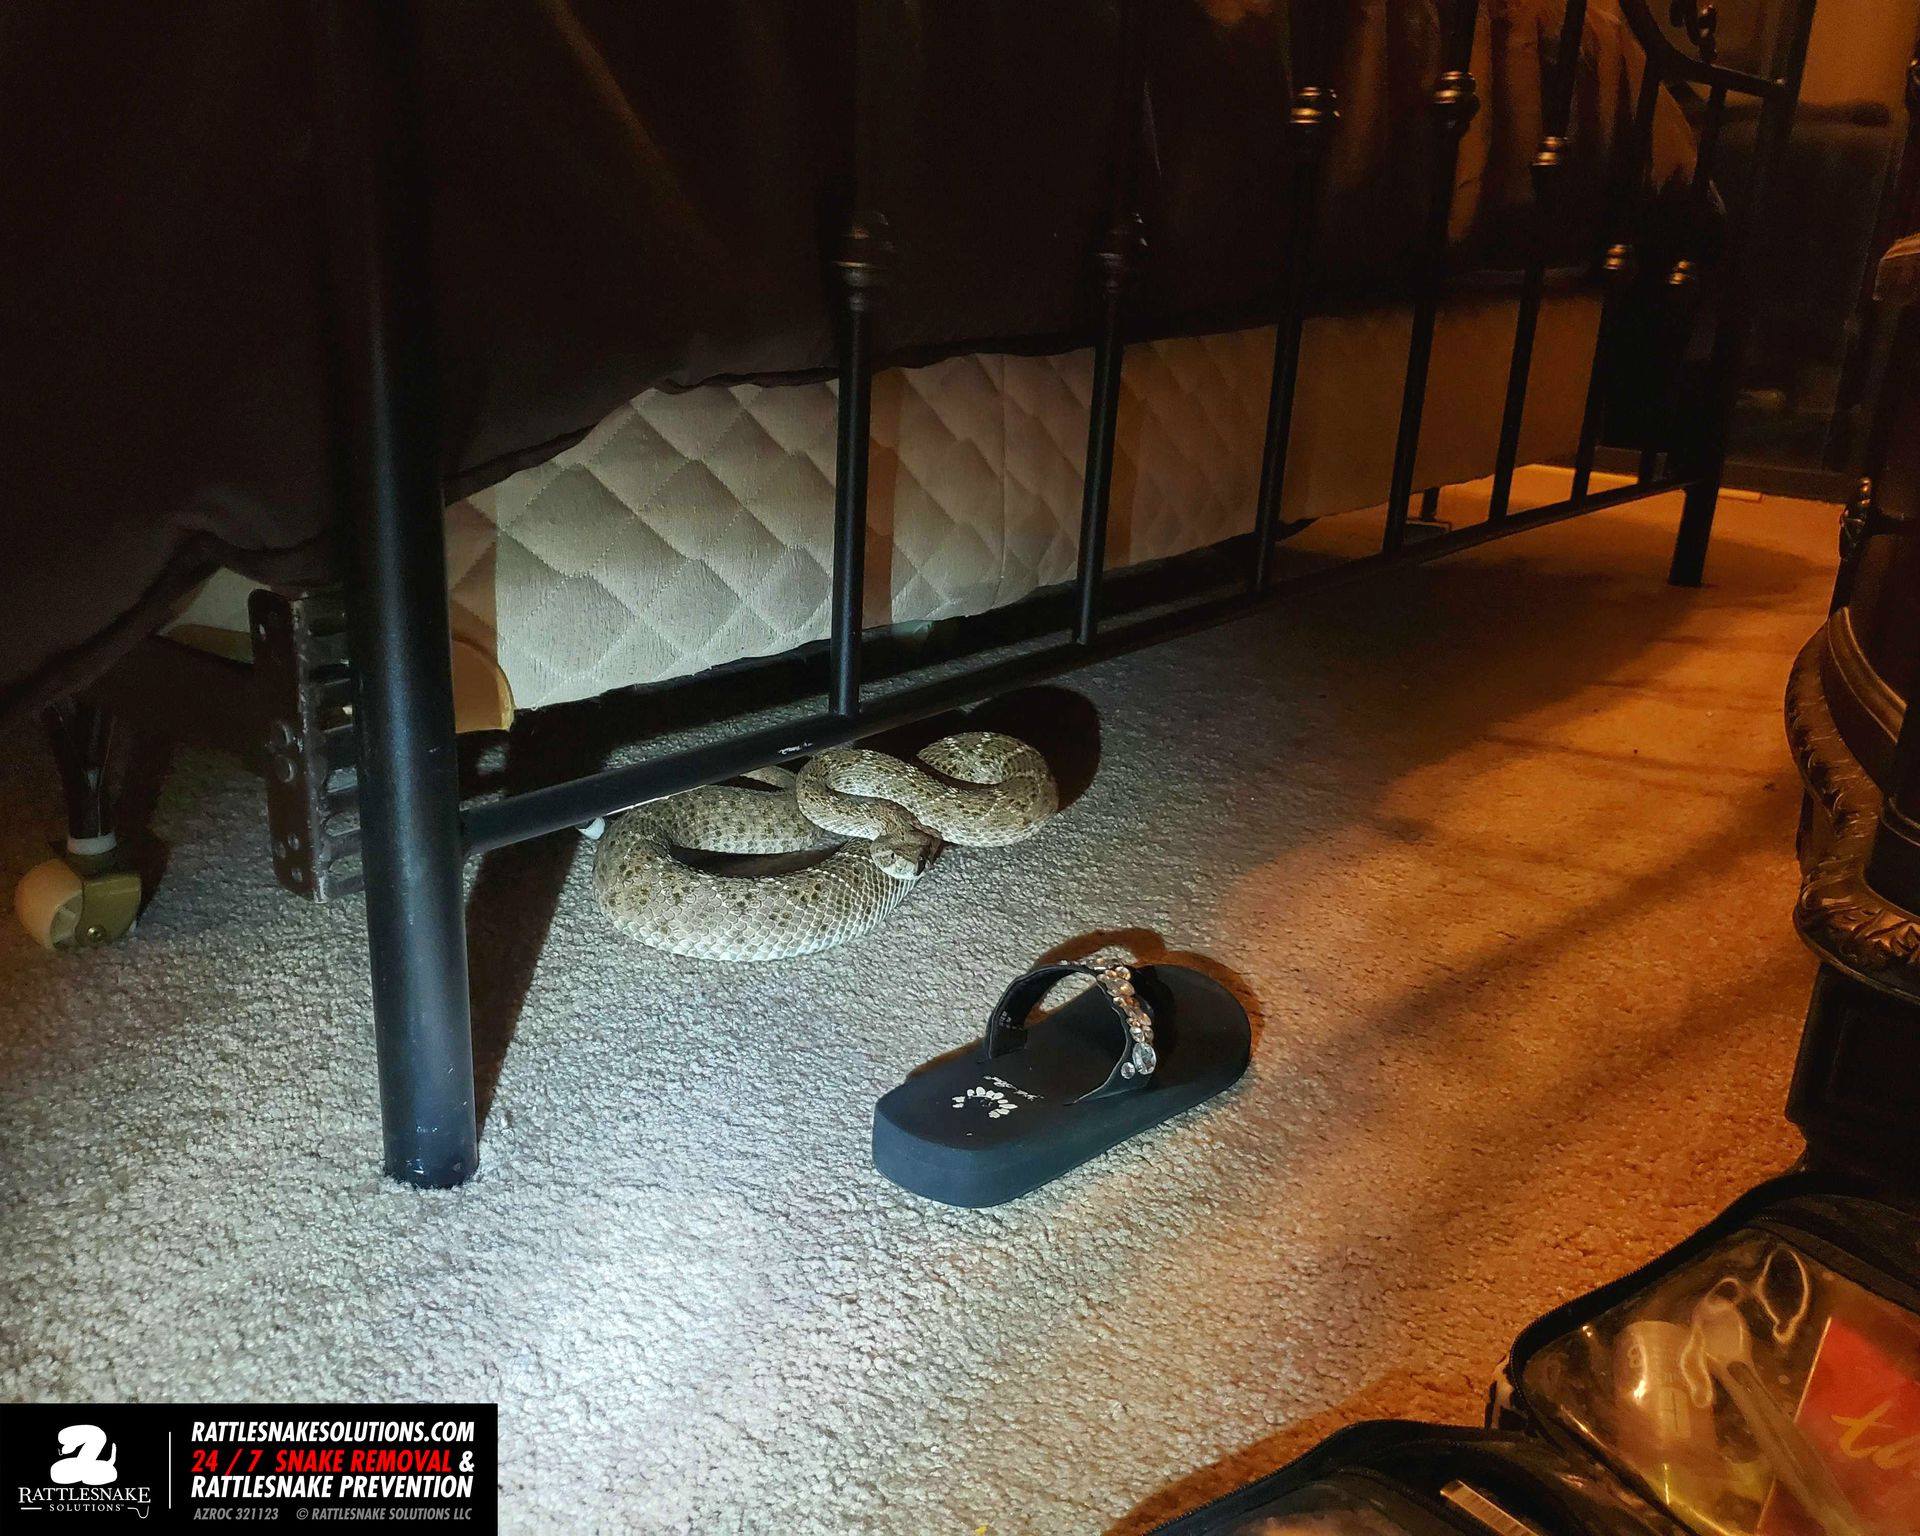 Rattlesnake in a house! How does this even happen? - Rattlesnake Solutions Dream Of Snake Hiding In House